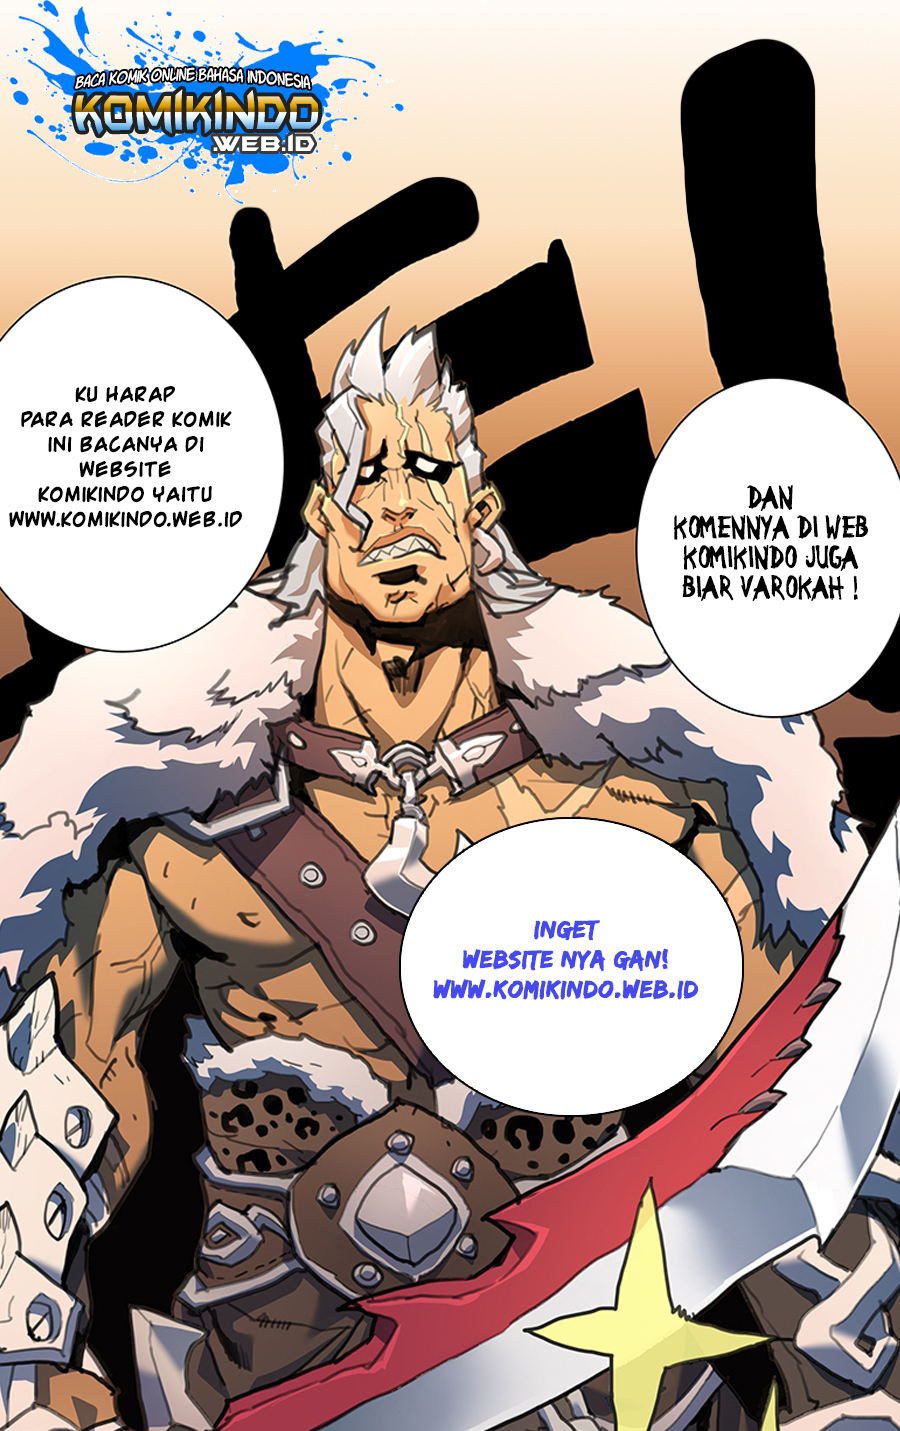 Lord Xue Ying Chapter 6-2